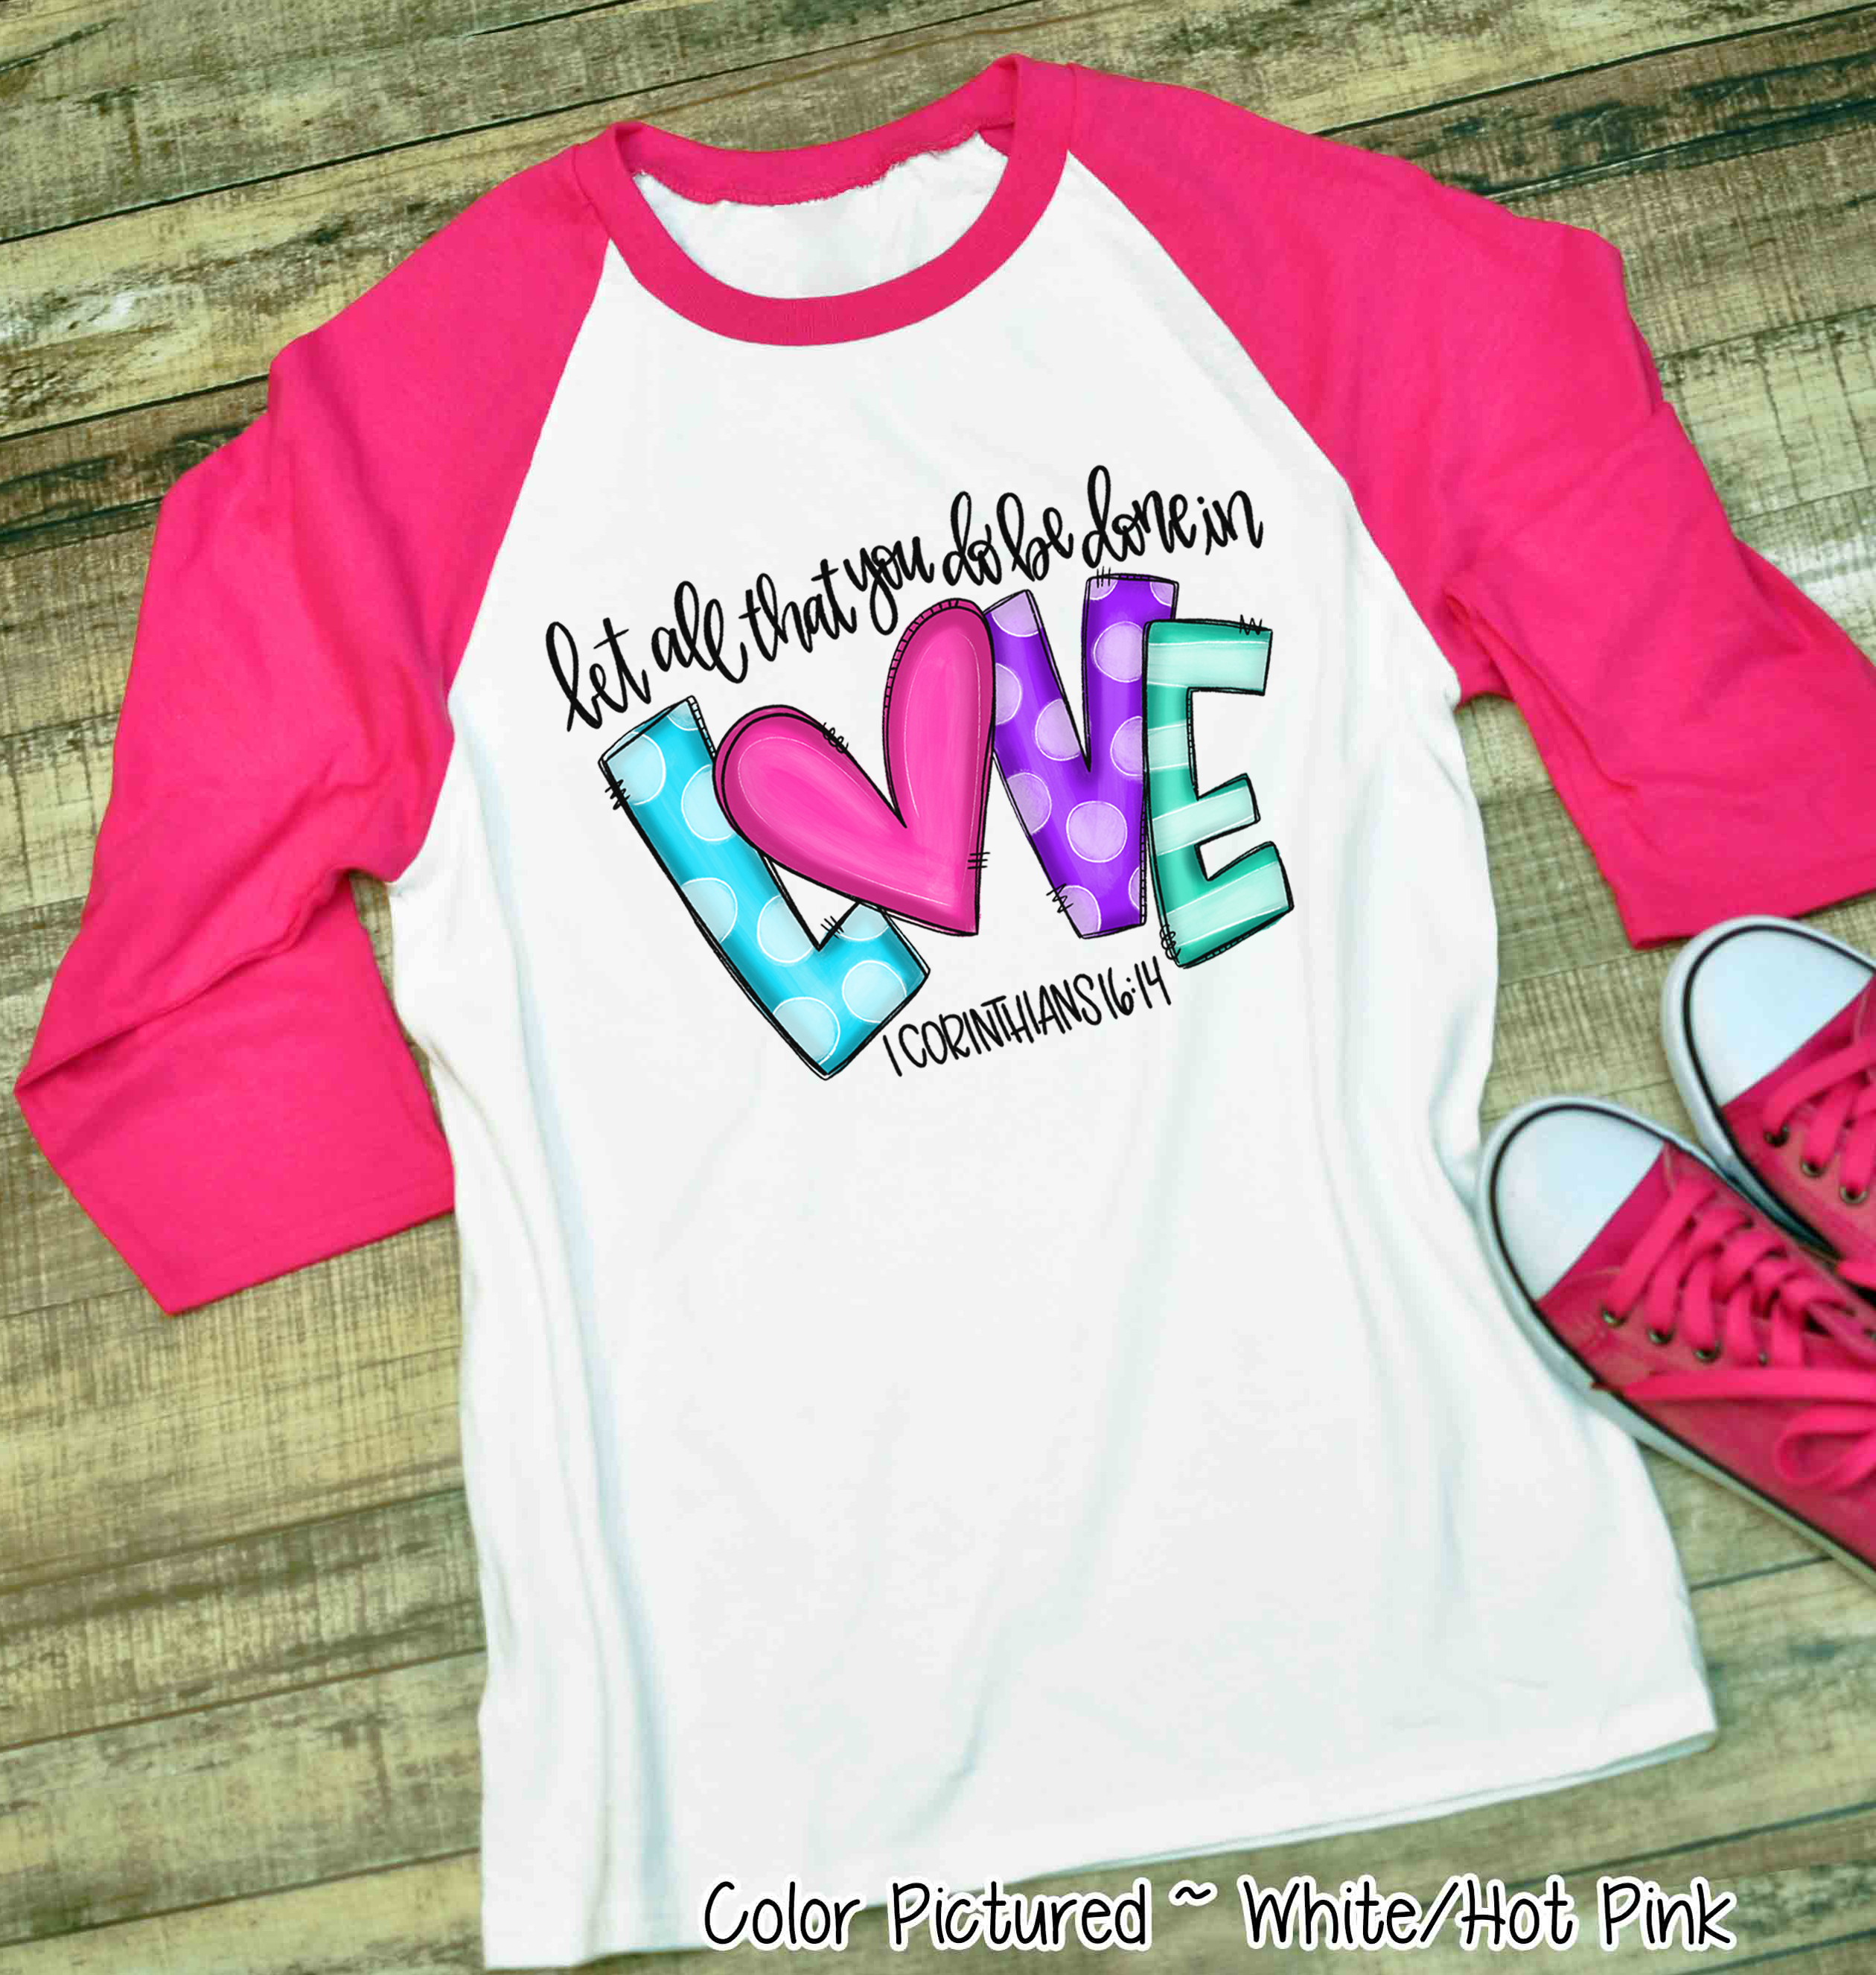 Let all that you do be done in LOVE Shirt